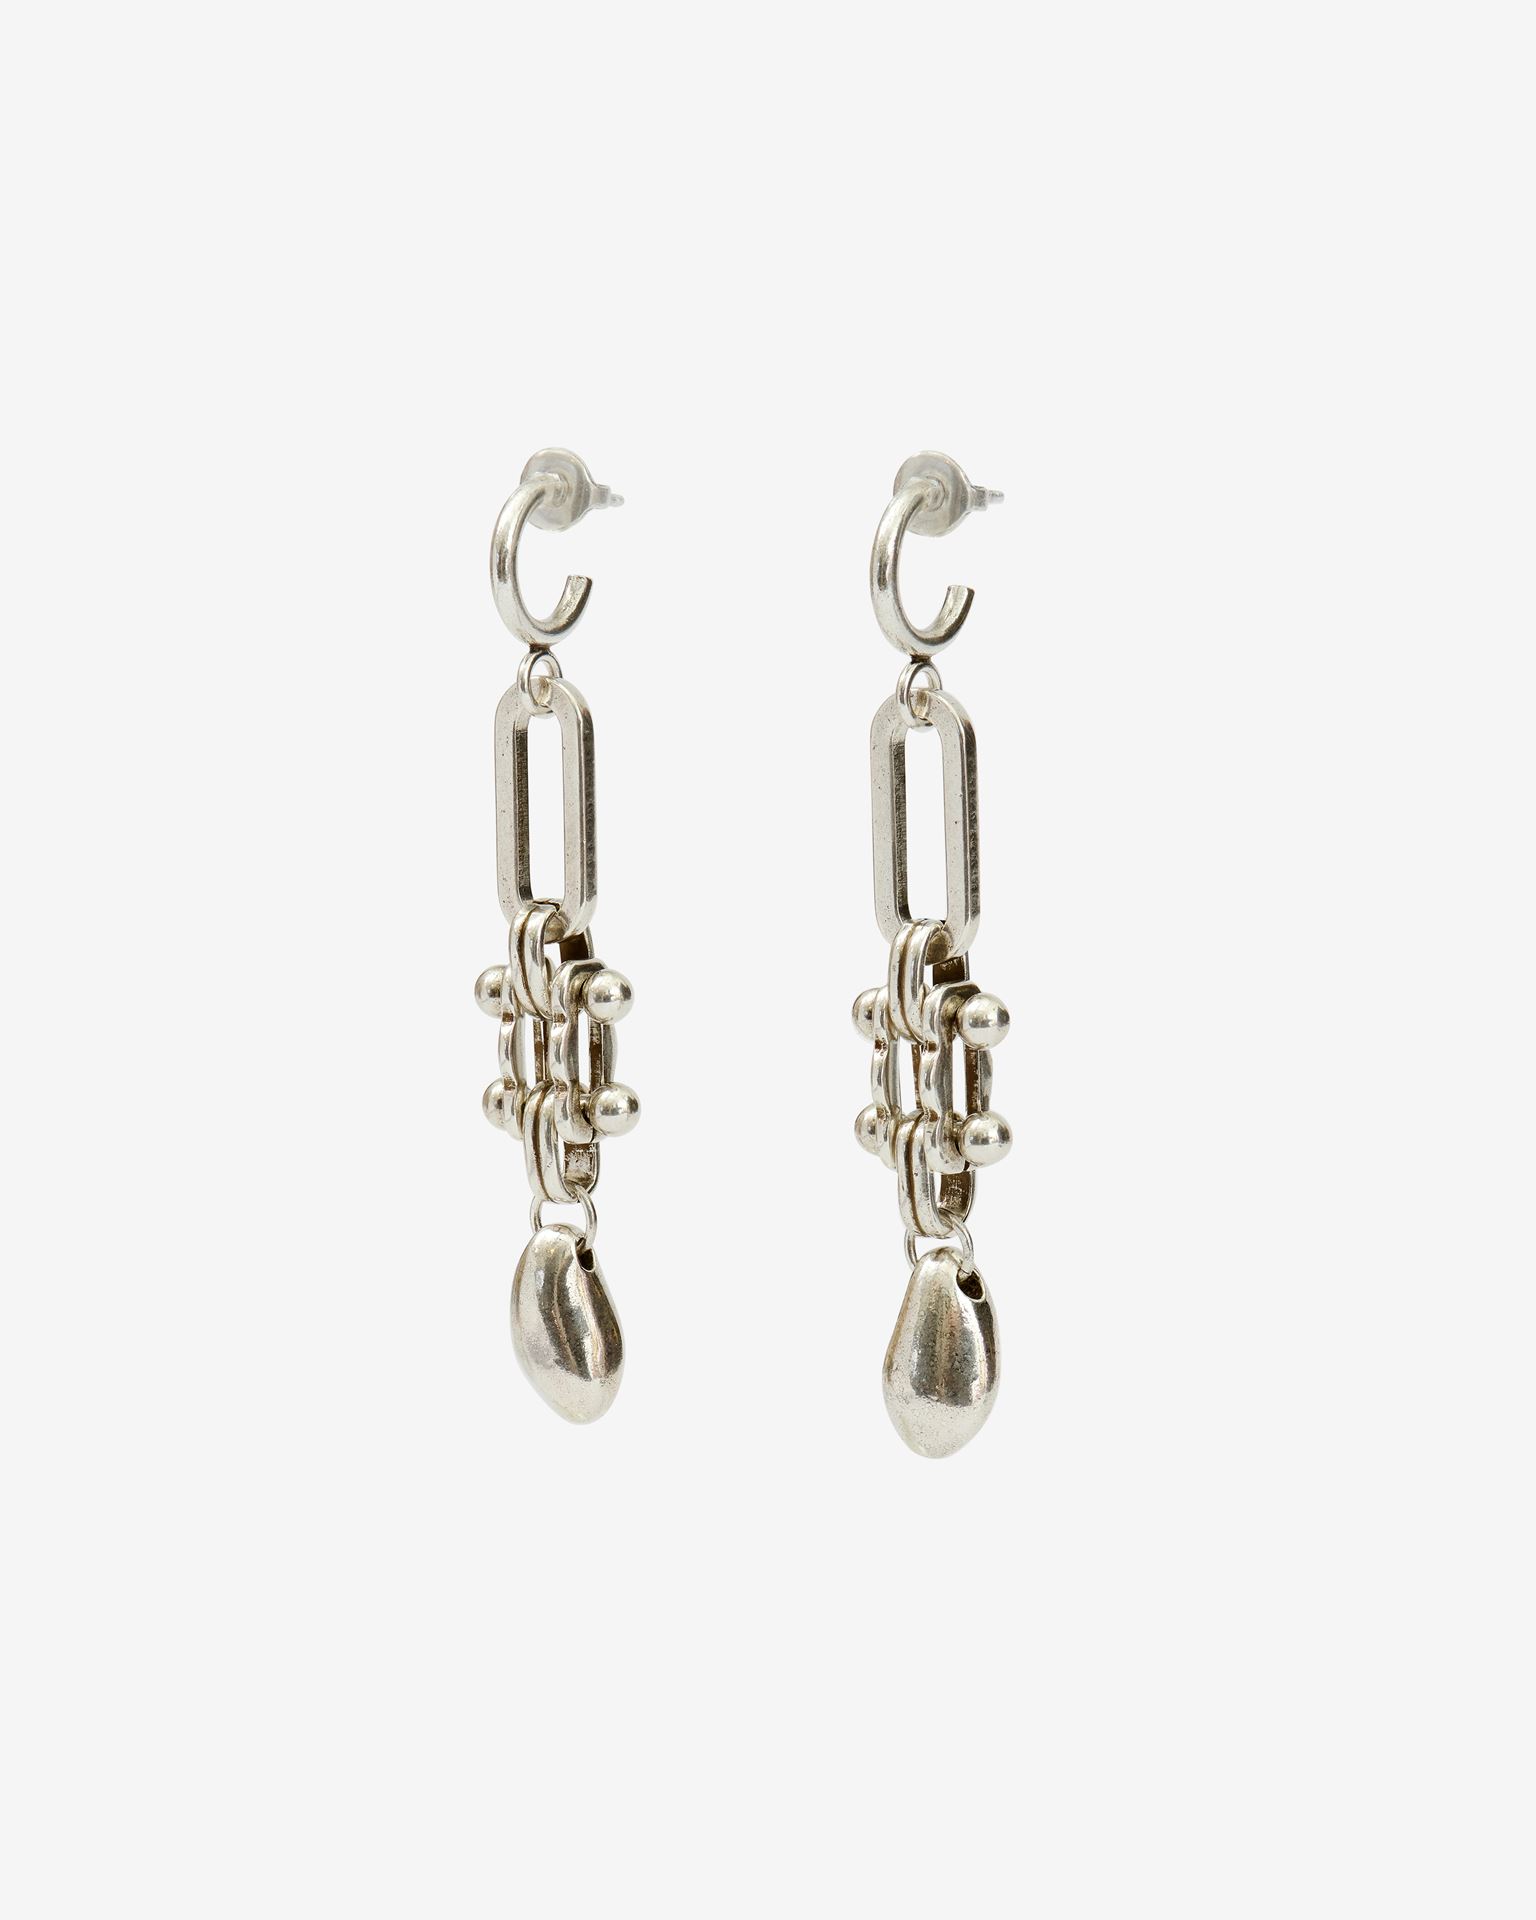 ISABEL MARANT, PENDIENTES LOVELY - Mujer - Plateado